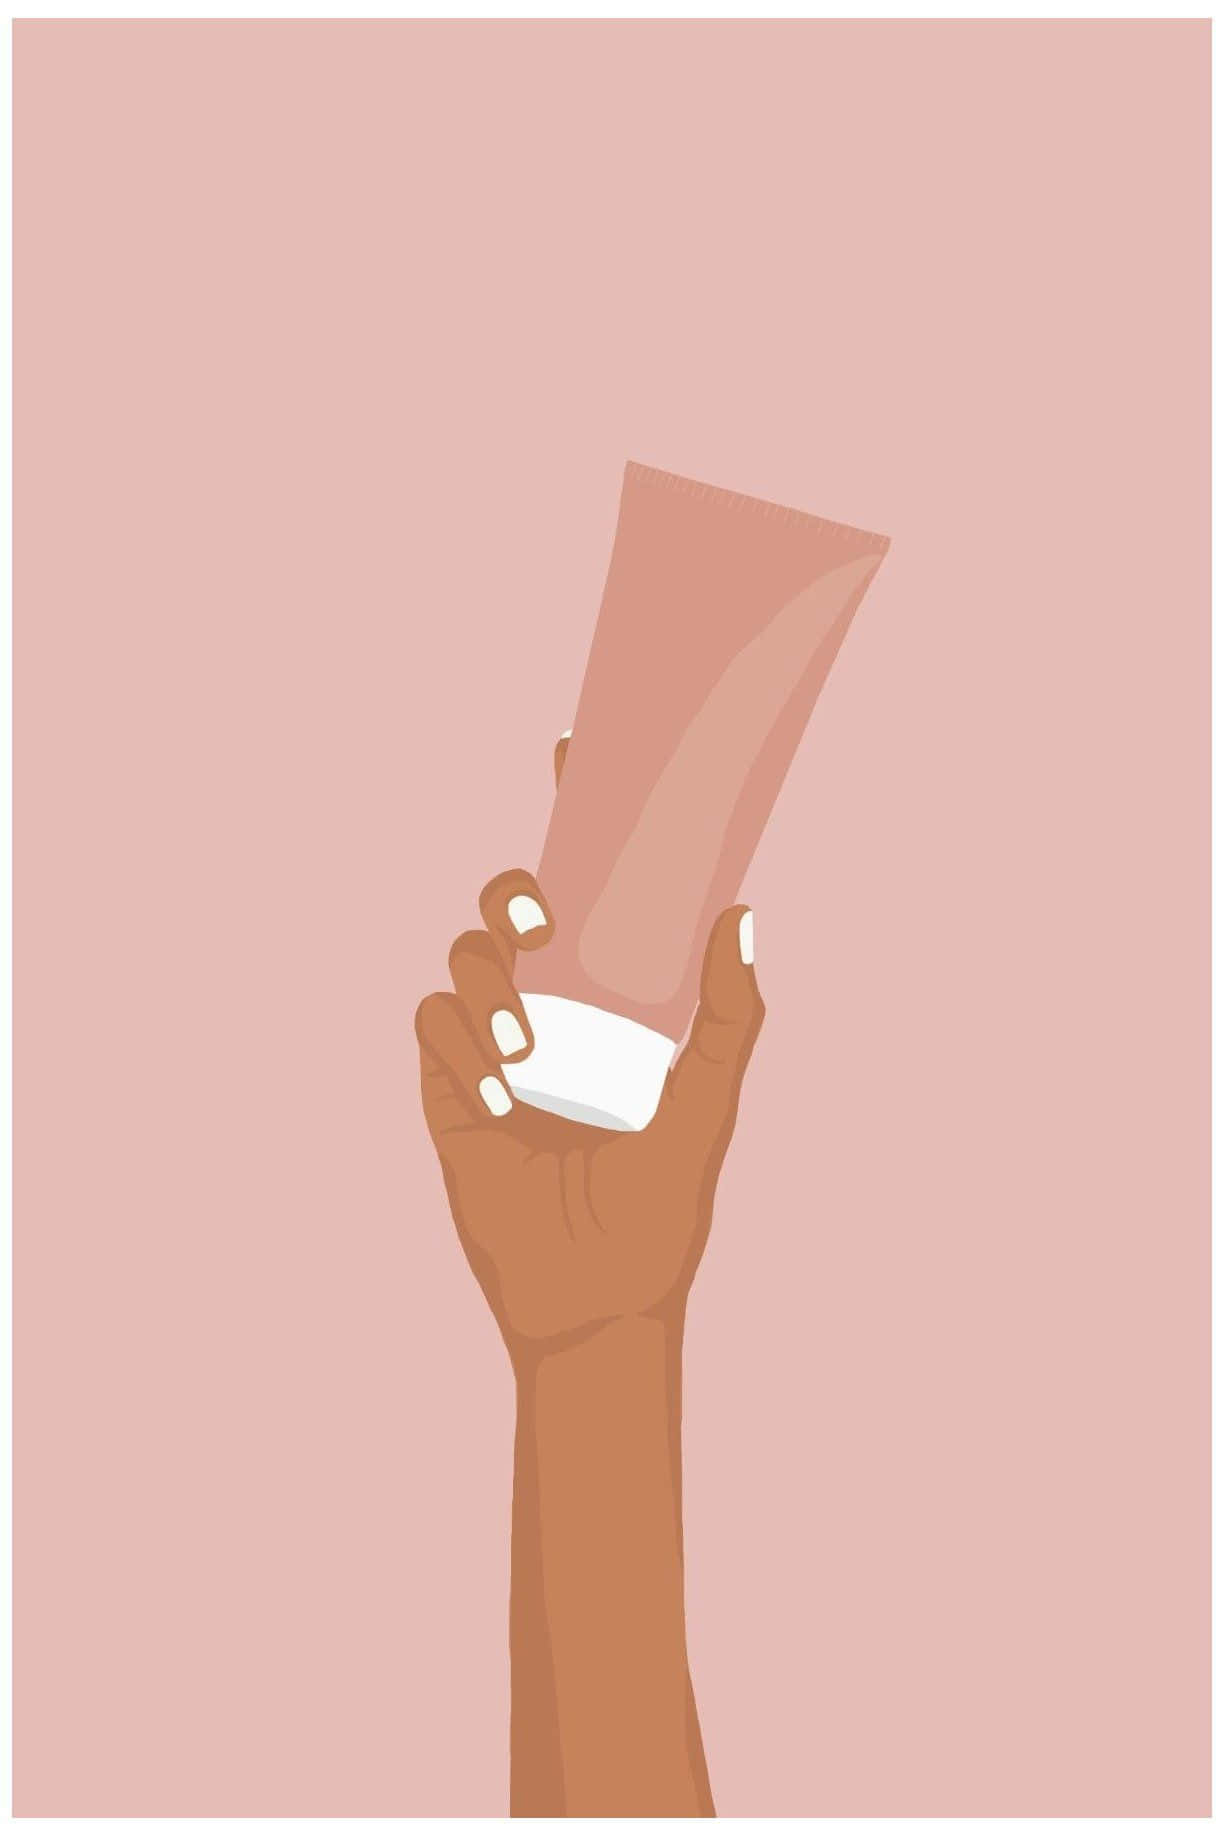 Skincare Product In Hand Illustration Wallpaper